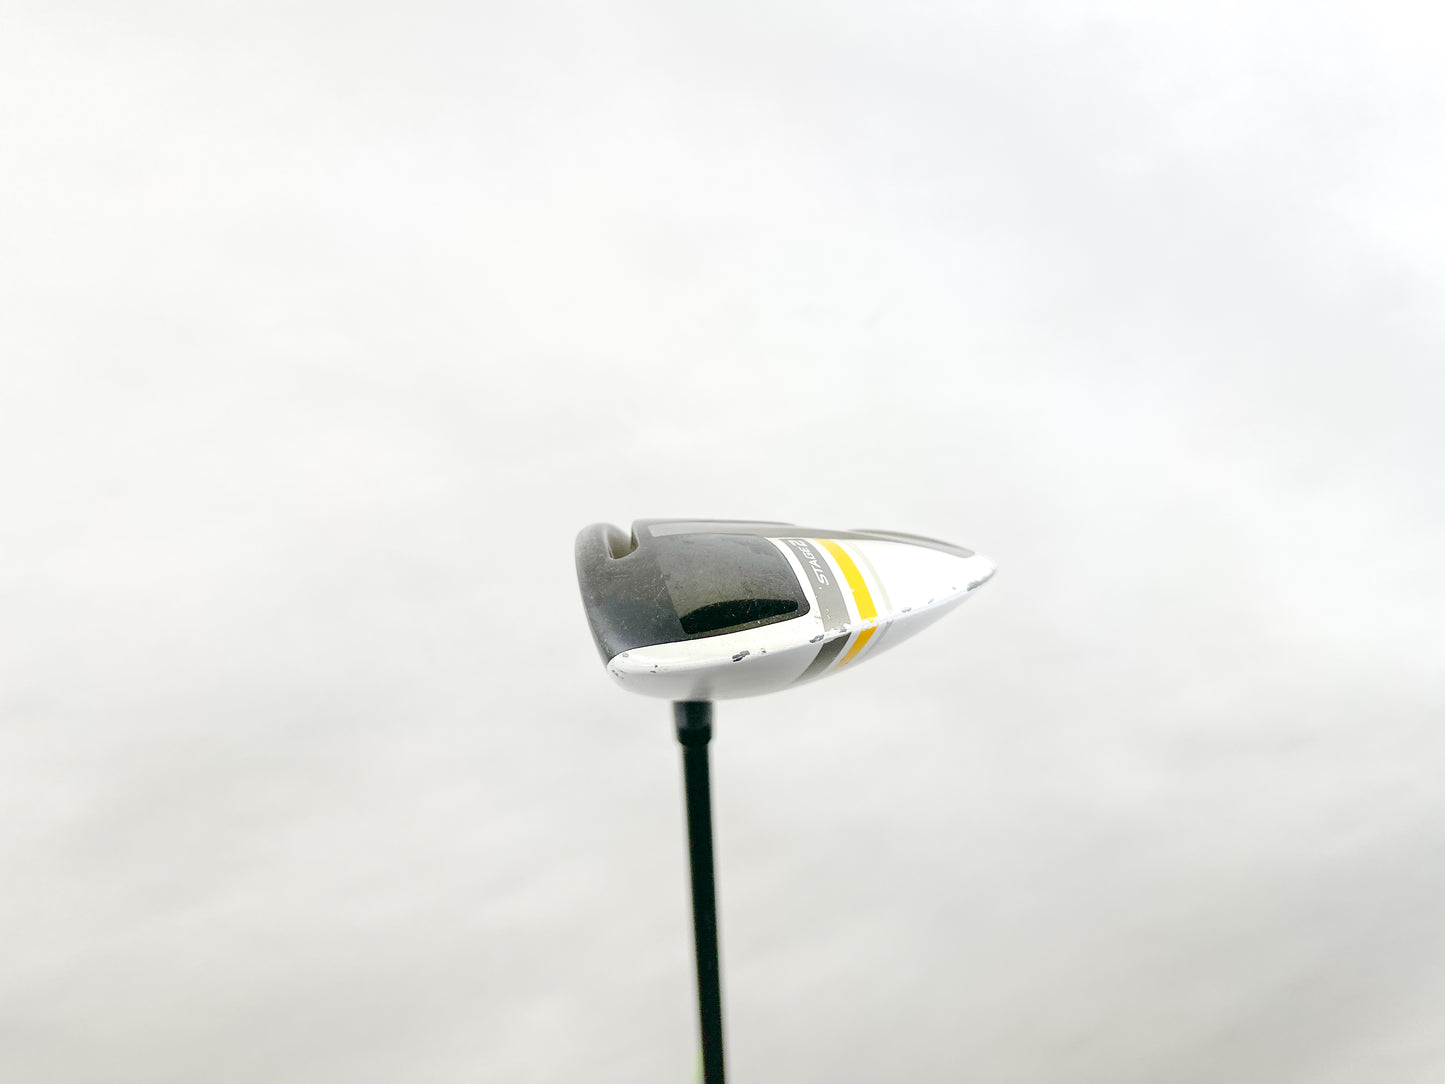 Used TaylorMade RocketBallz RBZ Stage 2 3-Wood - Right-Handed - 17 Degrees - Seniors Flex-Next Round